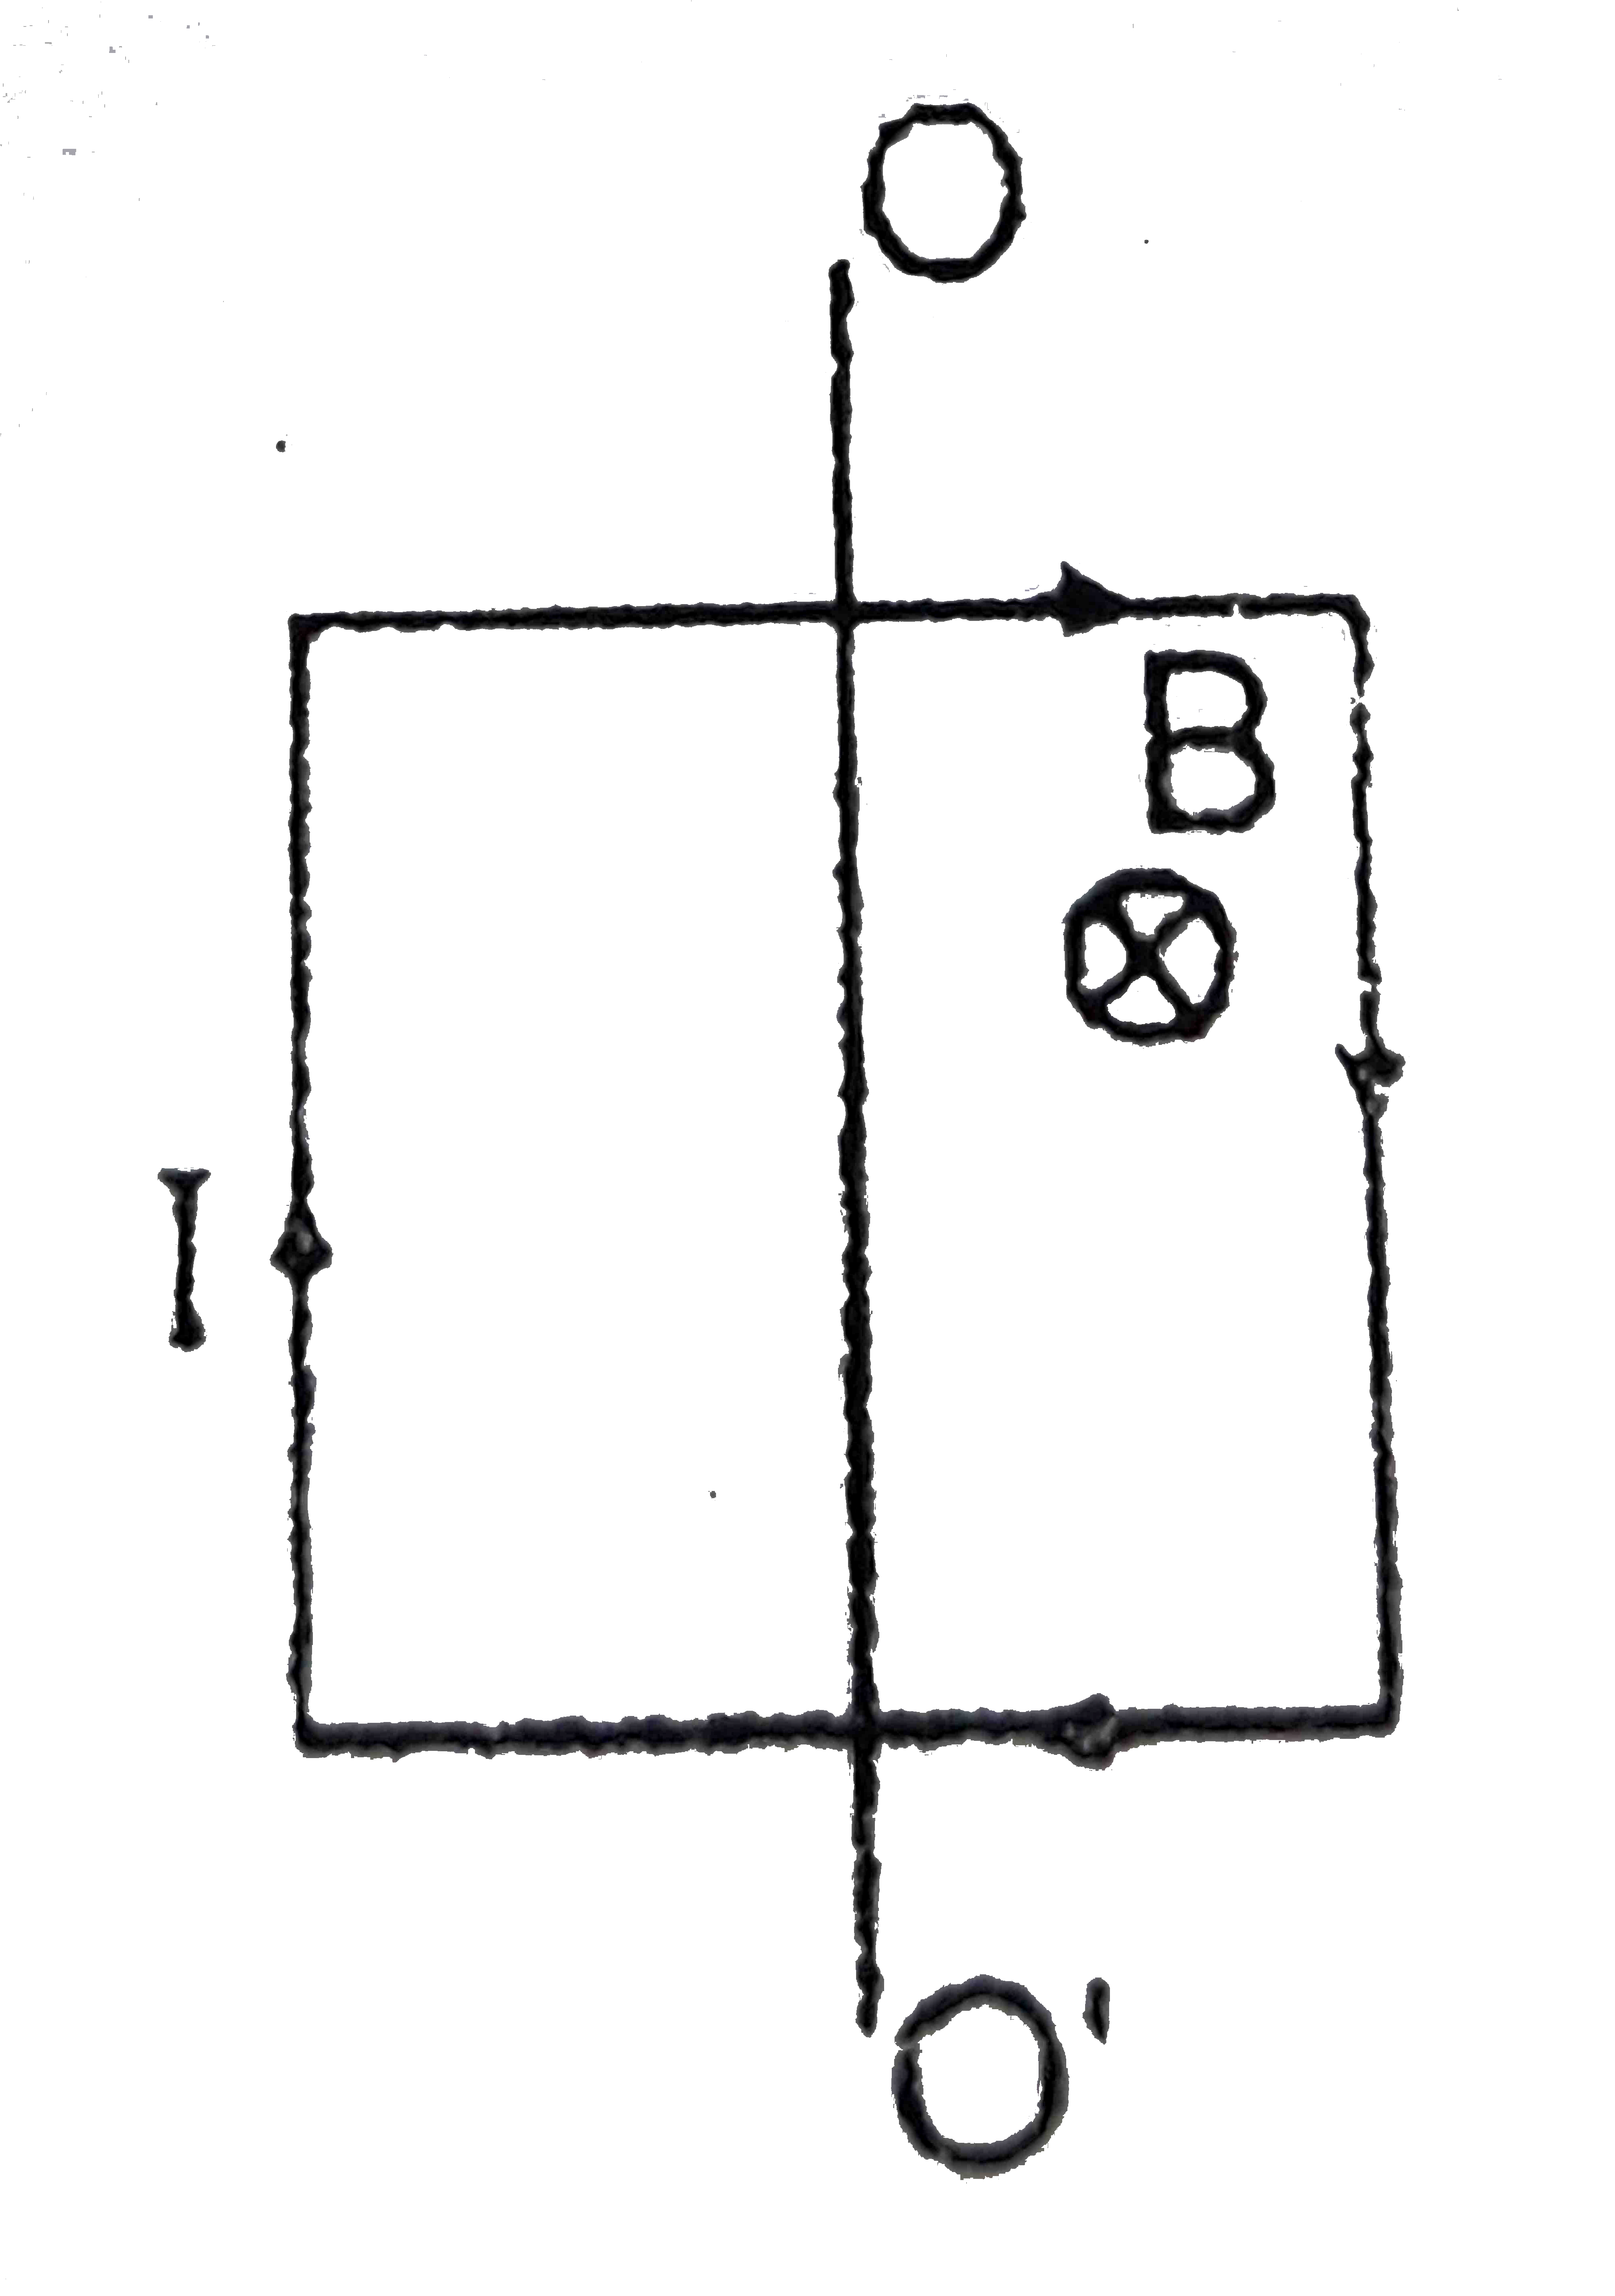 A square current carrying loop made of thin wire and having a mass m=10g can rotate without friction with respect to the vertical axis OO' passing through the centre of the loop at right angles to two opposite sides of the loop.The loop is placed in a homogeneous magnetic field with an induction B=10^(-1)T directed at right angles to the plane of the drawing.A current I=2A is flowing in the loop.Find the period of small oscillations that the loop perfoms about its position of stable equilibrium.